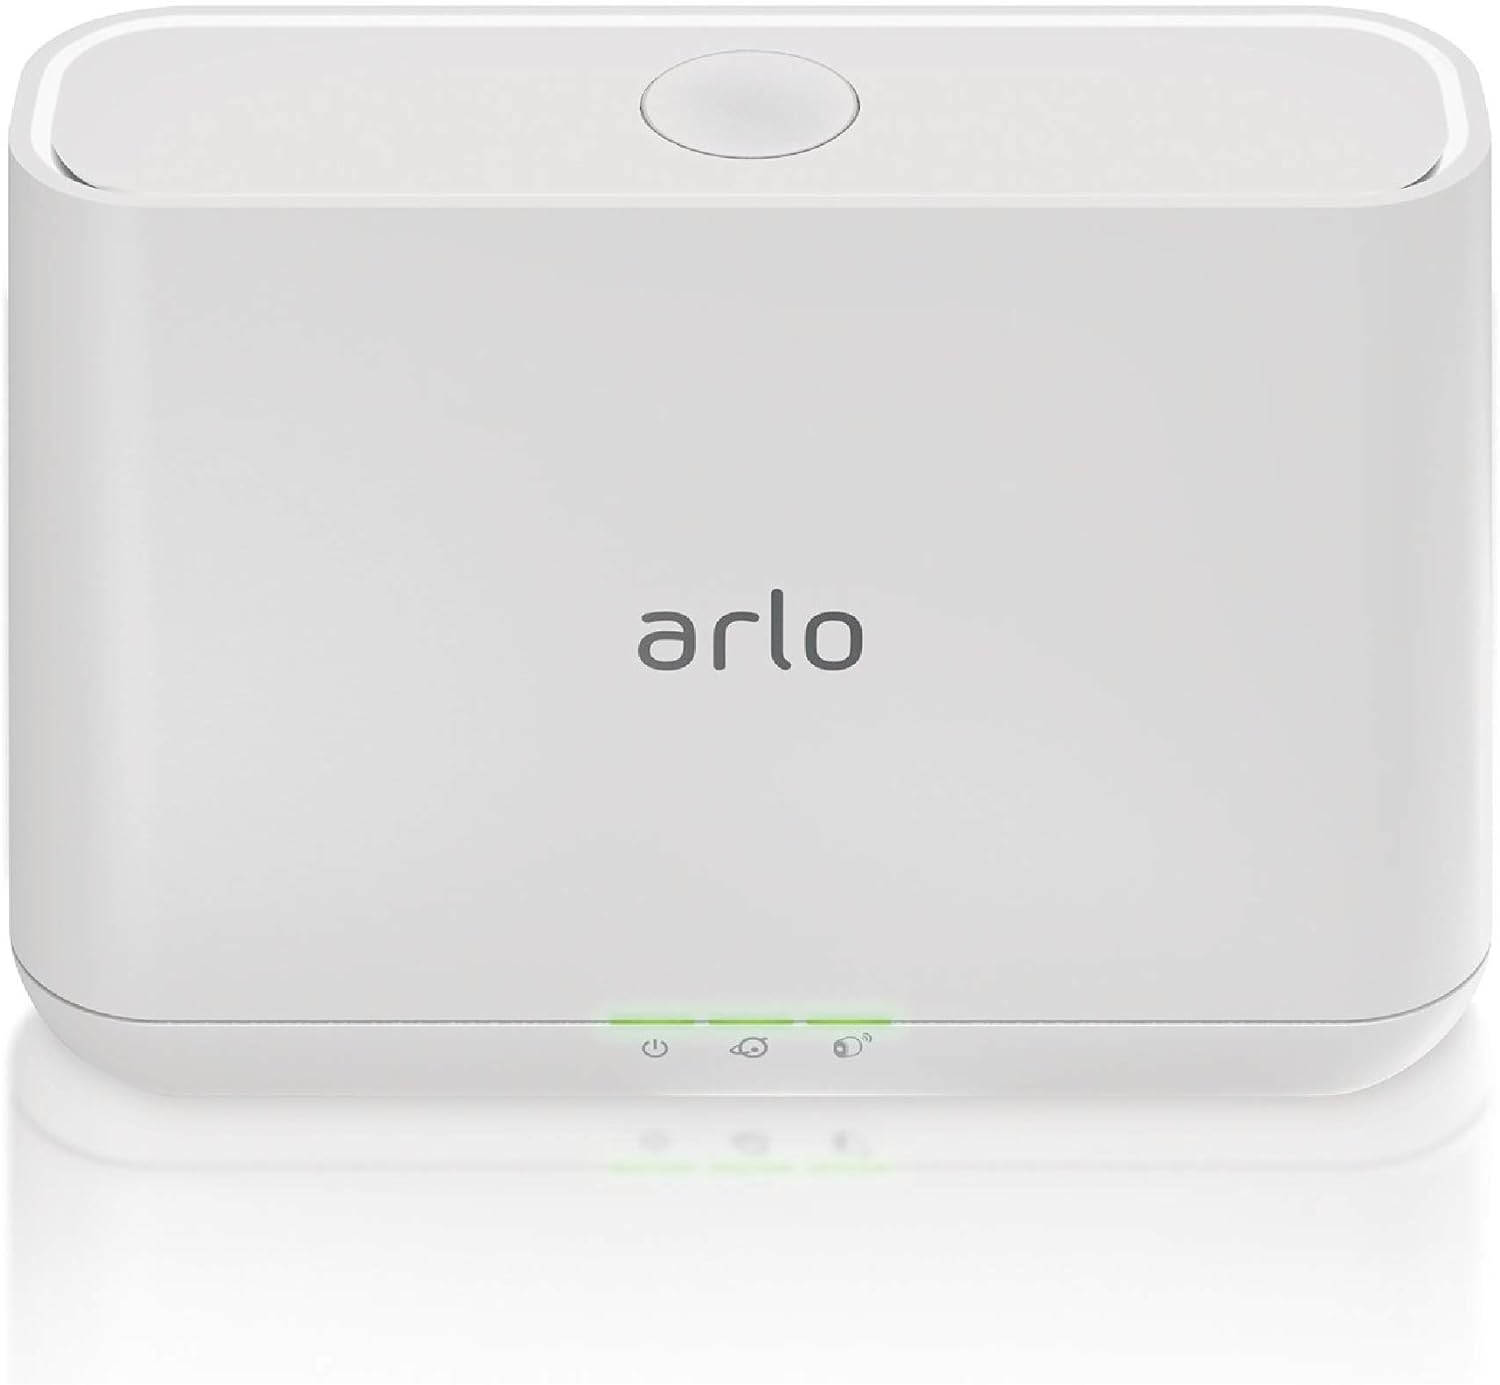 Arlo Accessory - Base Station | Build out your Arlo Kit | Compatible with Pro, Pro 2 Cameras | (VMB4000)